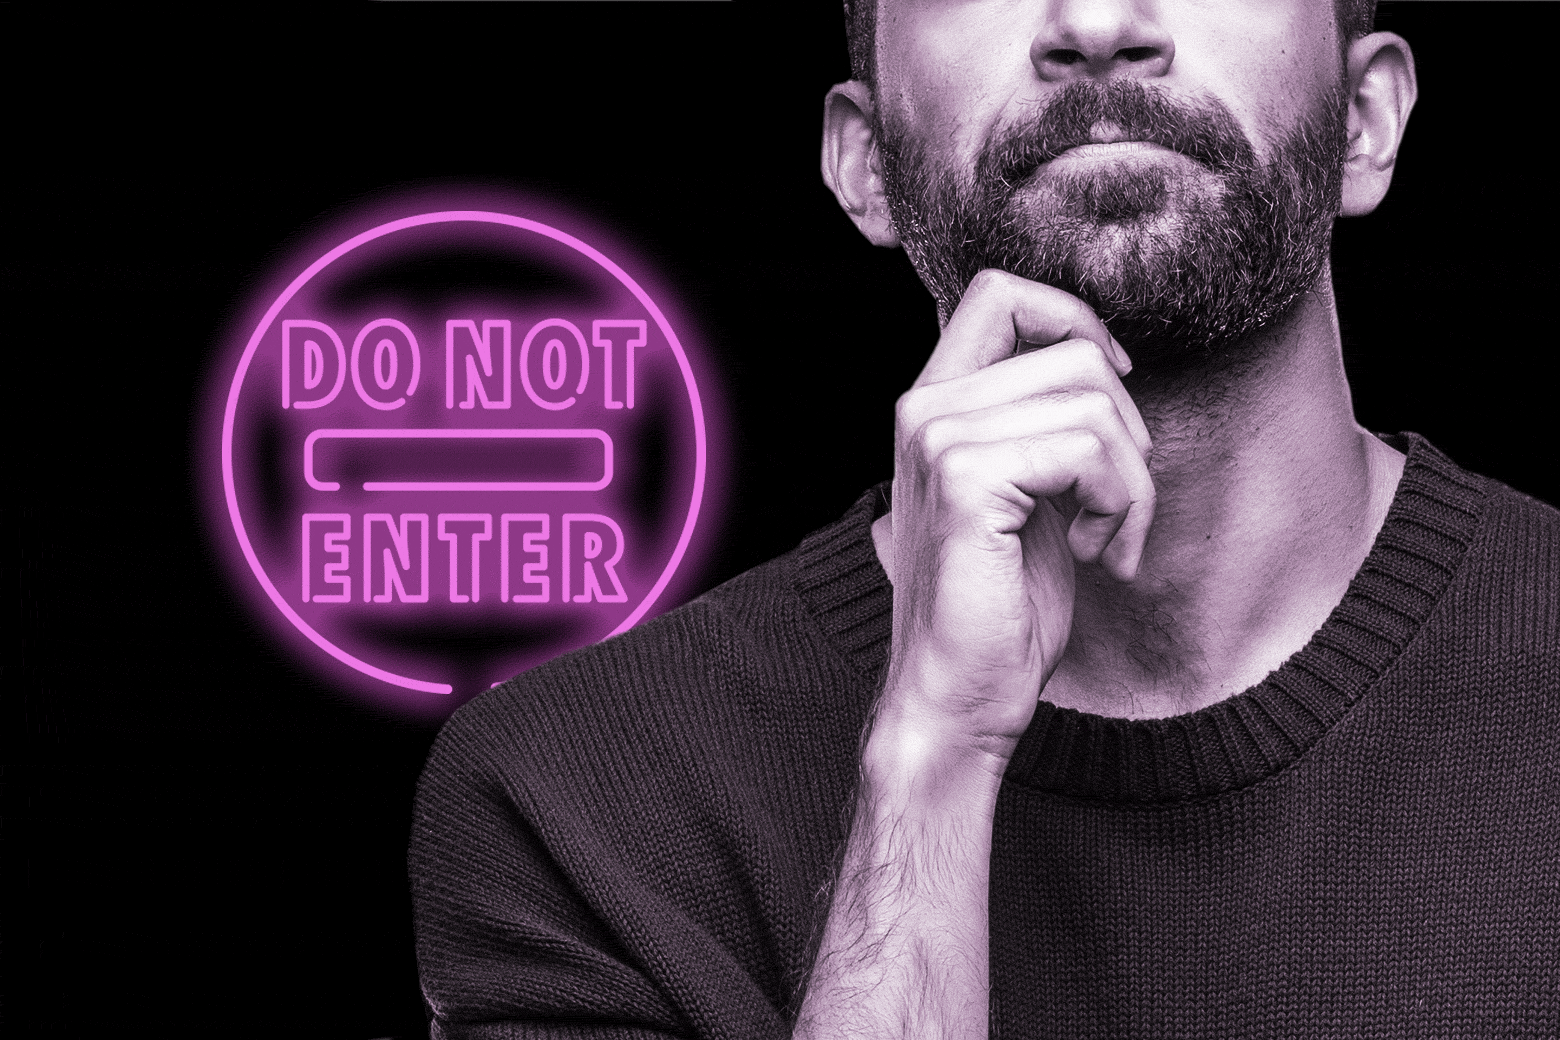 GIF of a man in contemplation. A neon "Do Not Enter" sign glows in the background.